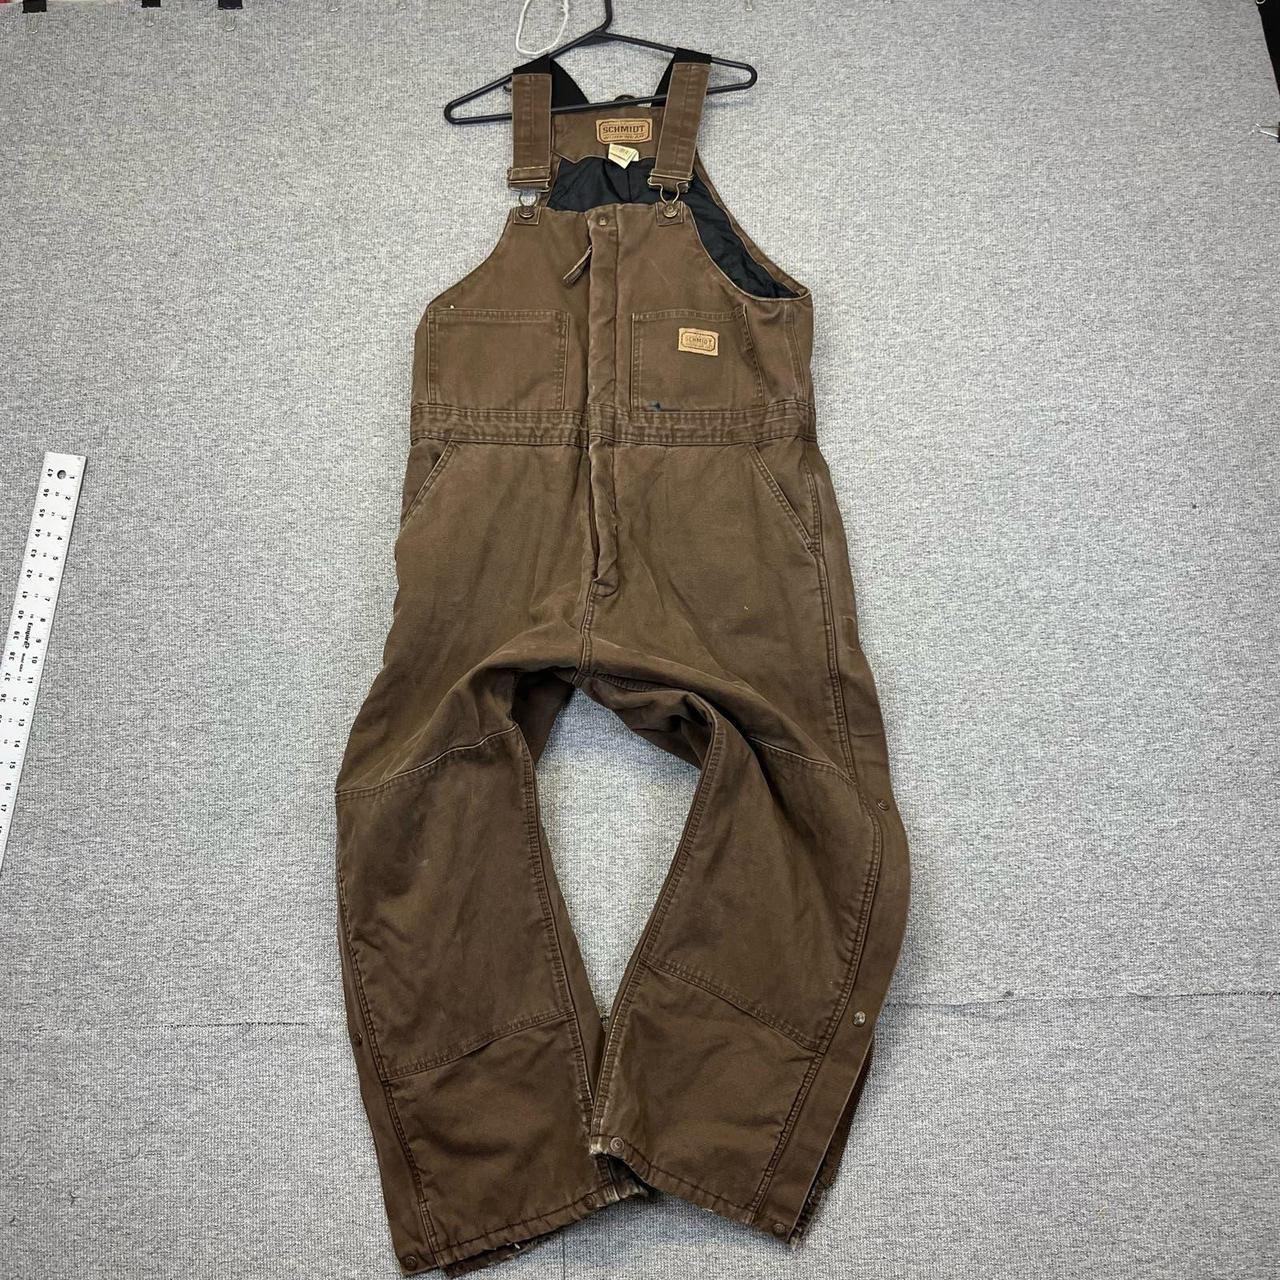 item listed by dominicdenimcompany